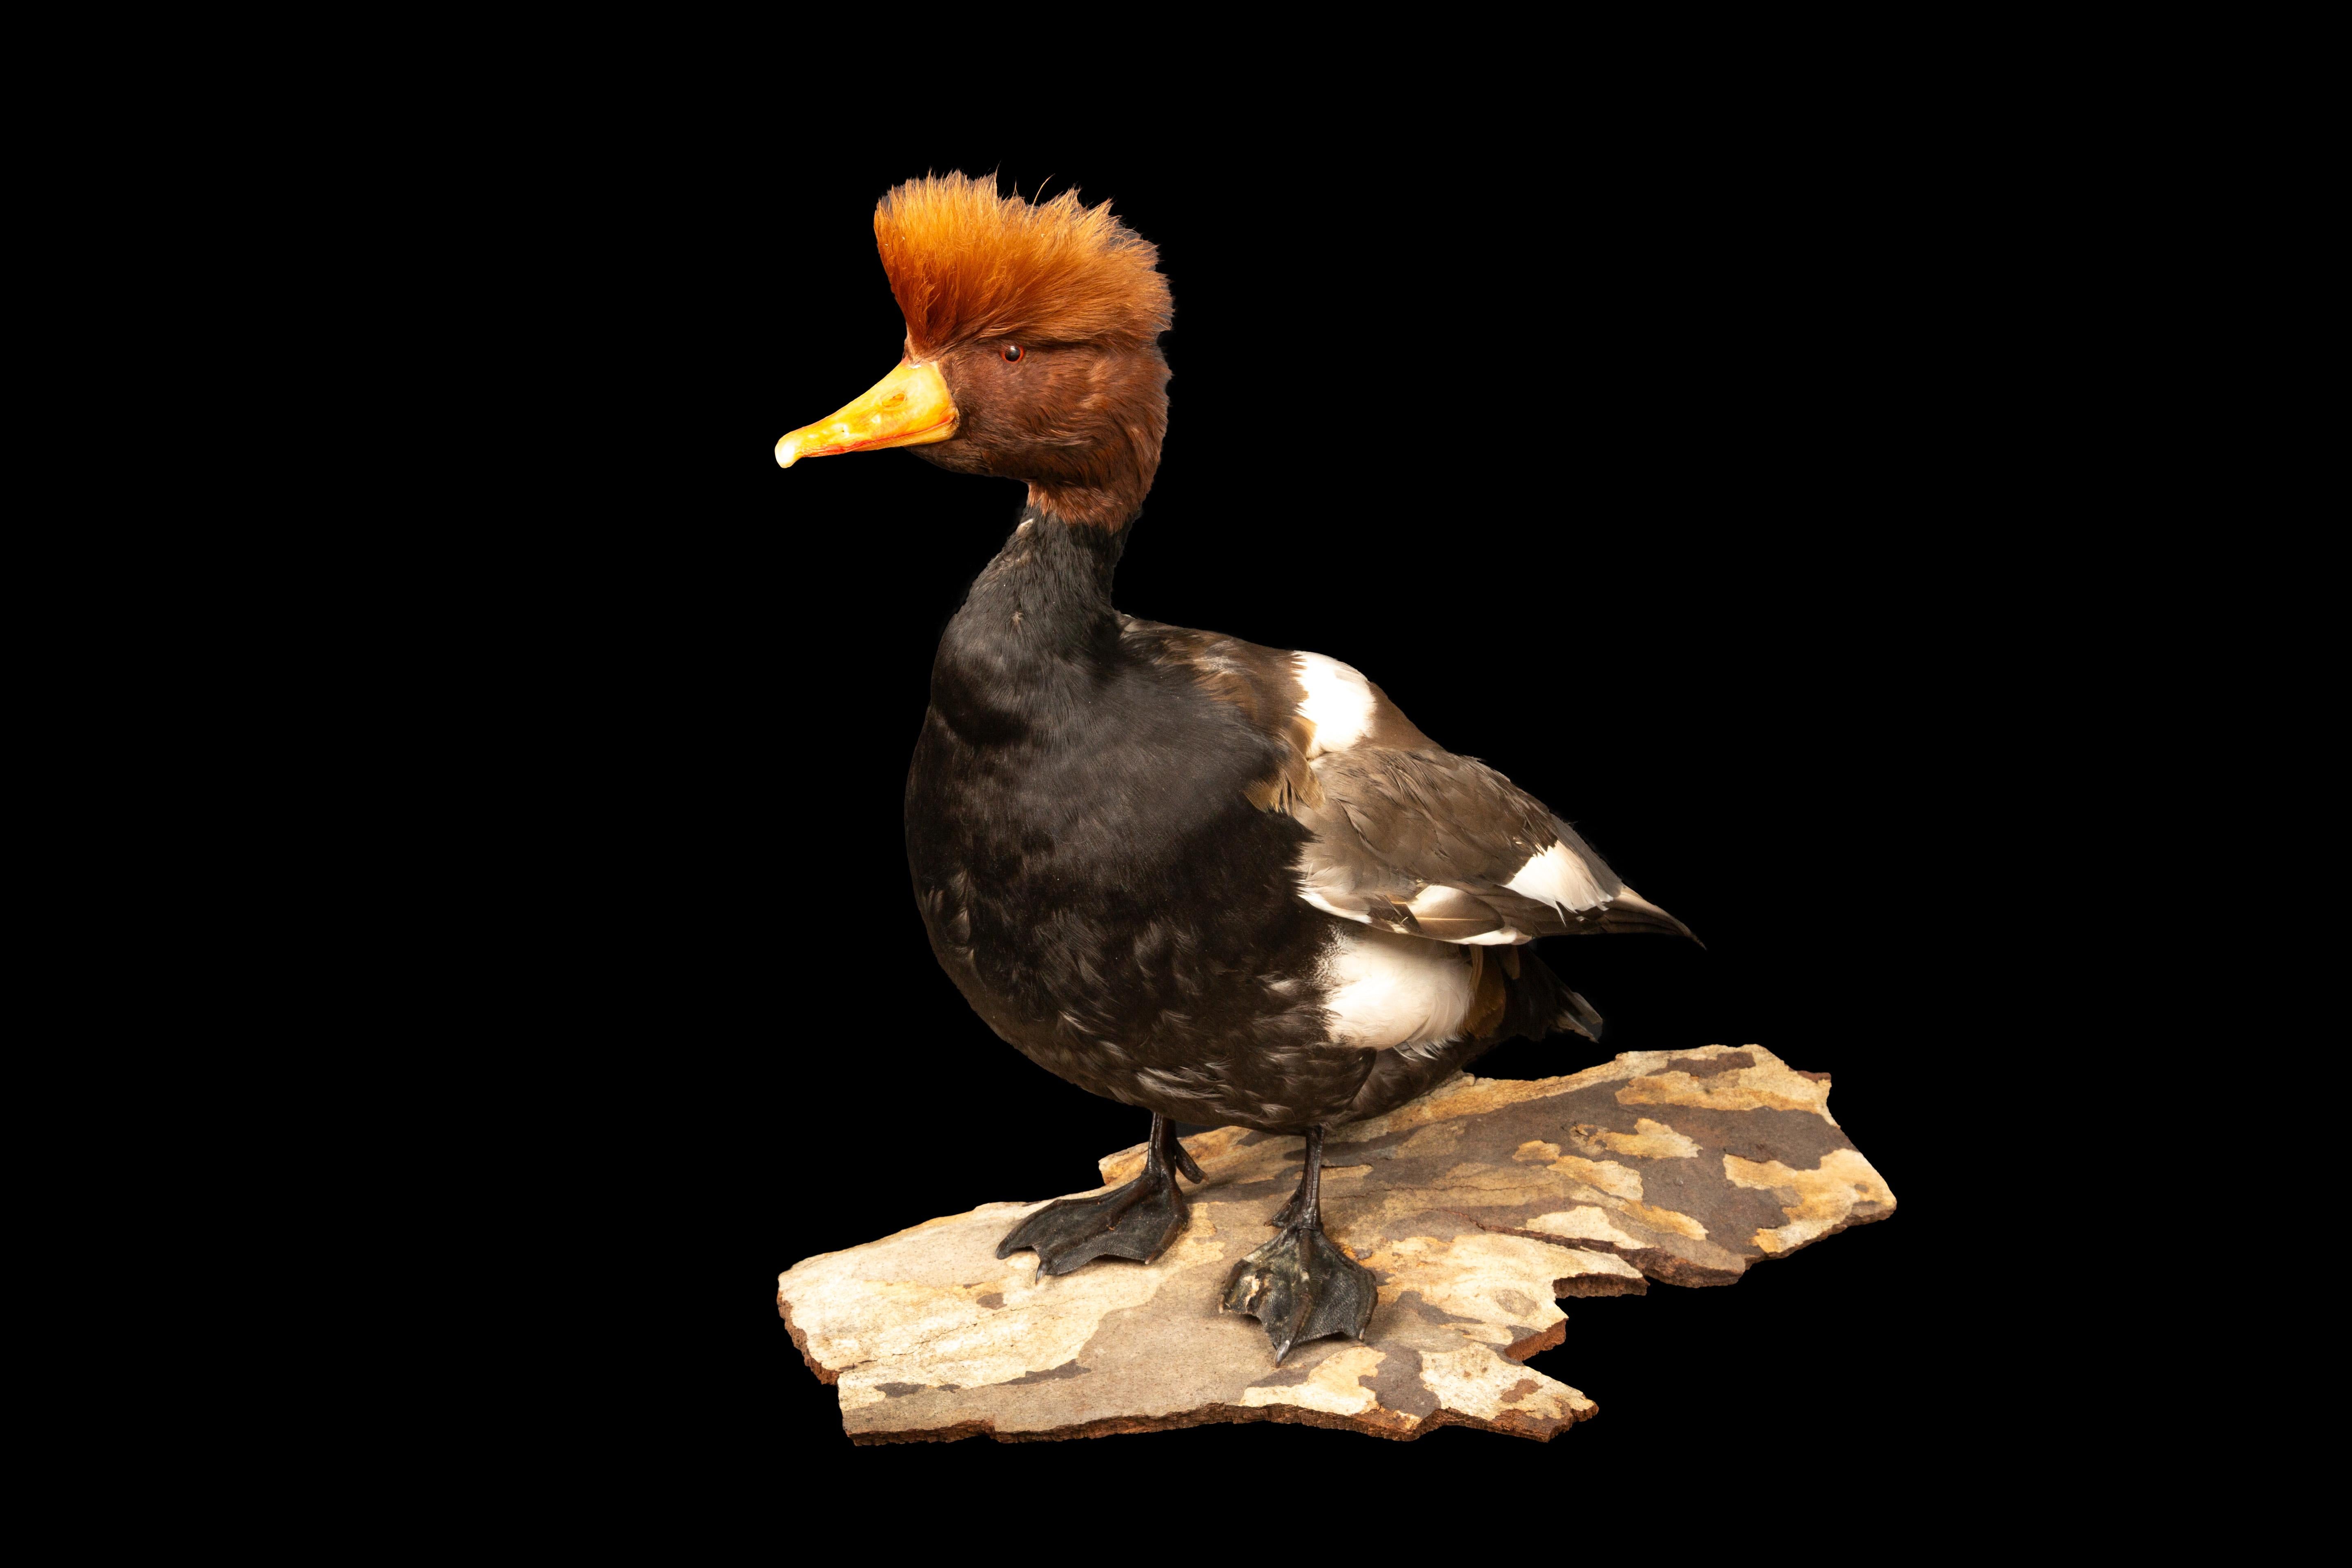 Red Crested Pochard Duck Taxidermy:

This striking taxidermy piece showcases the unmistakable beauty of the adult male red-crested pochard duck. With its rounded orange head, vibrant red bill, and contrasting black breast, this specimen is a true